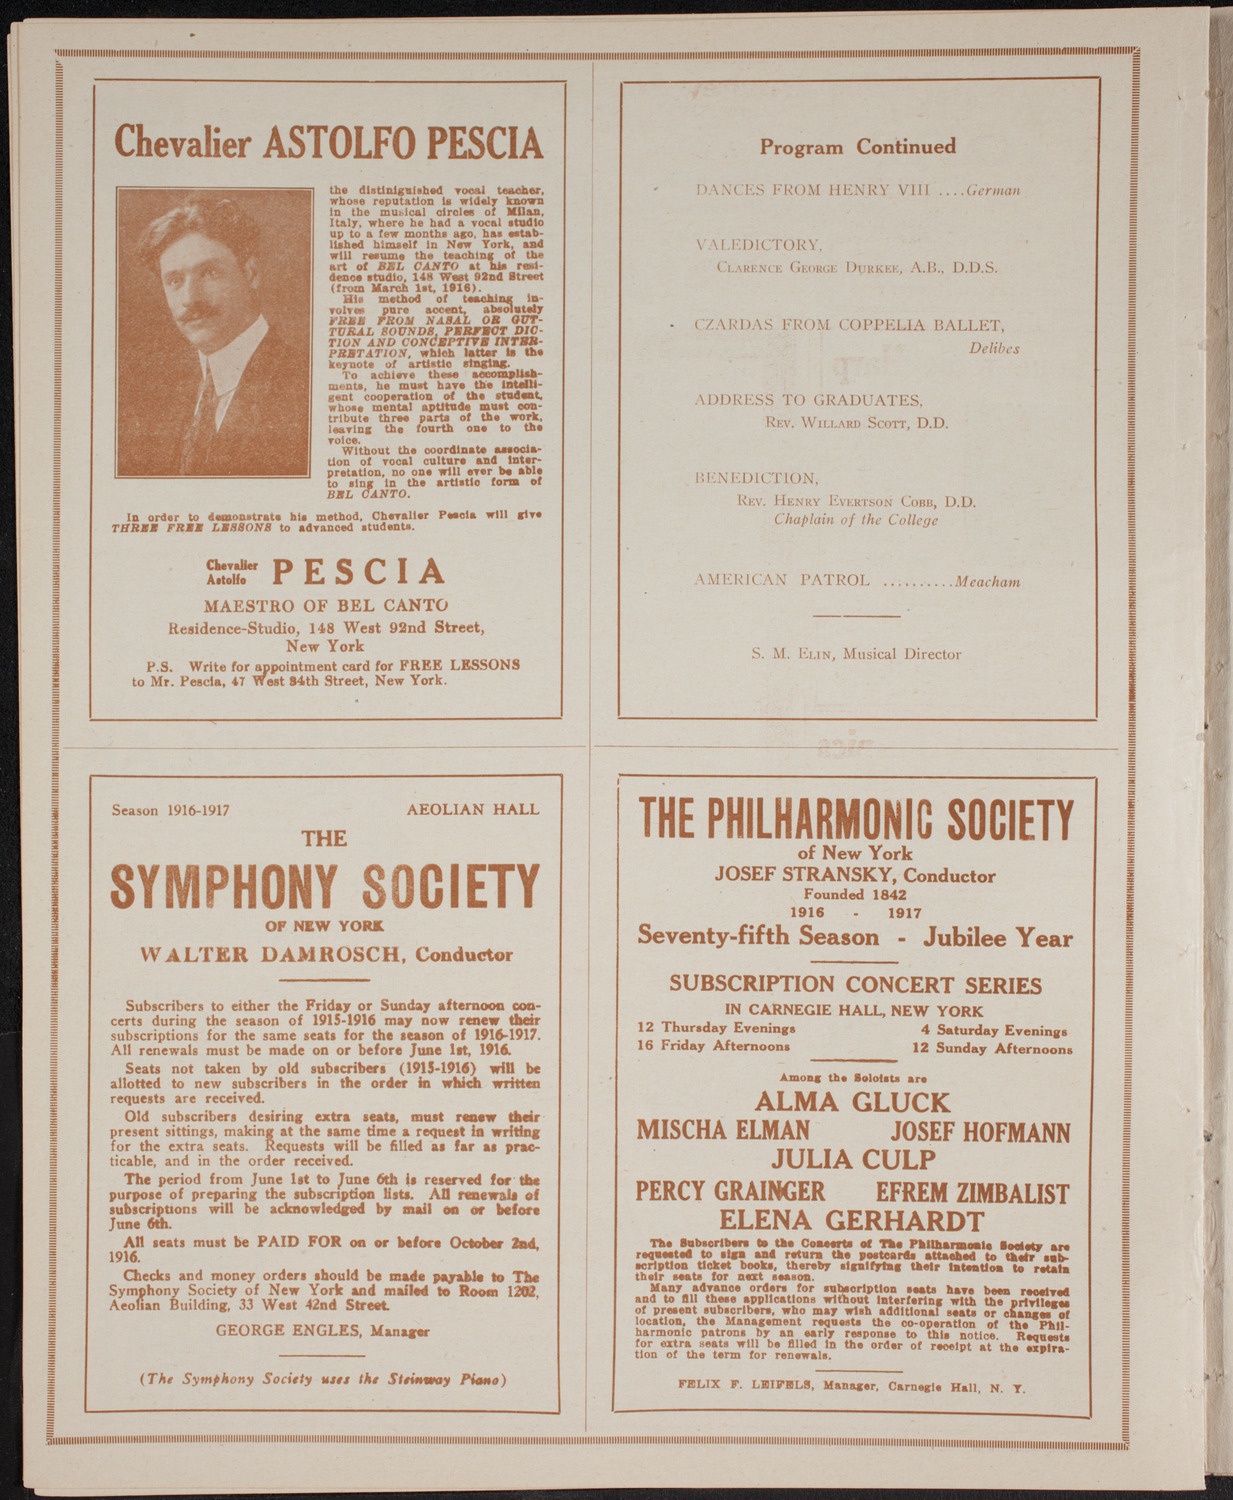 Graduation: College of Dental and Oral Surgery of New York, June 6, 1916, program page 8